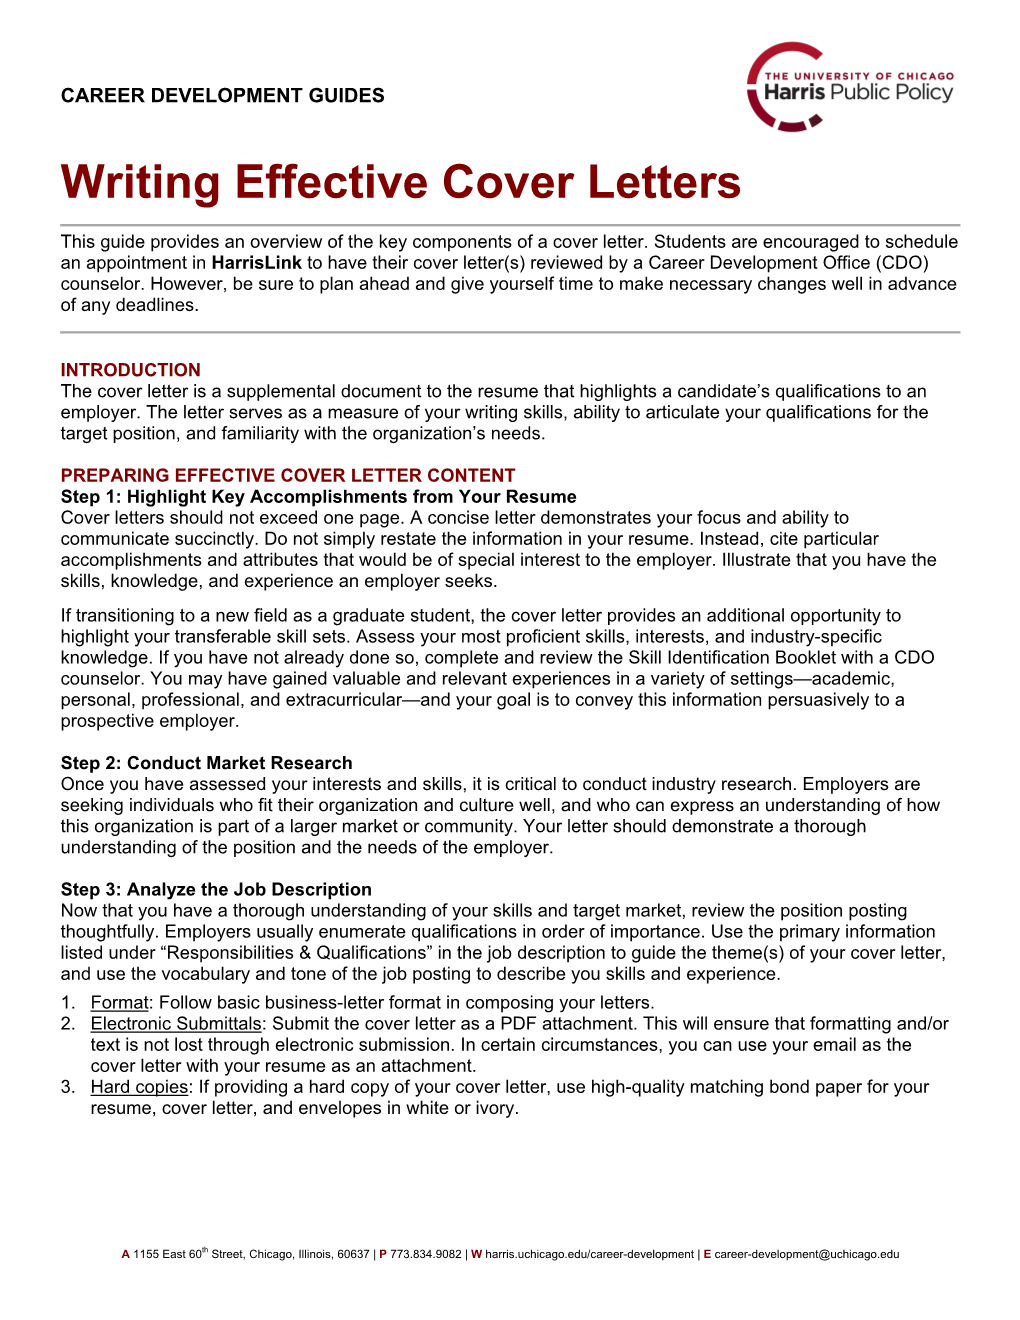 Writing Effective Cover Letters